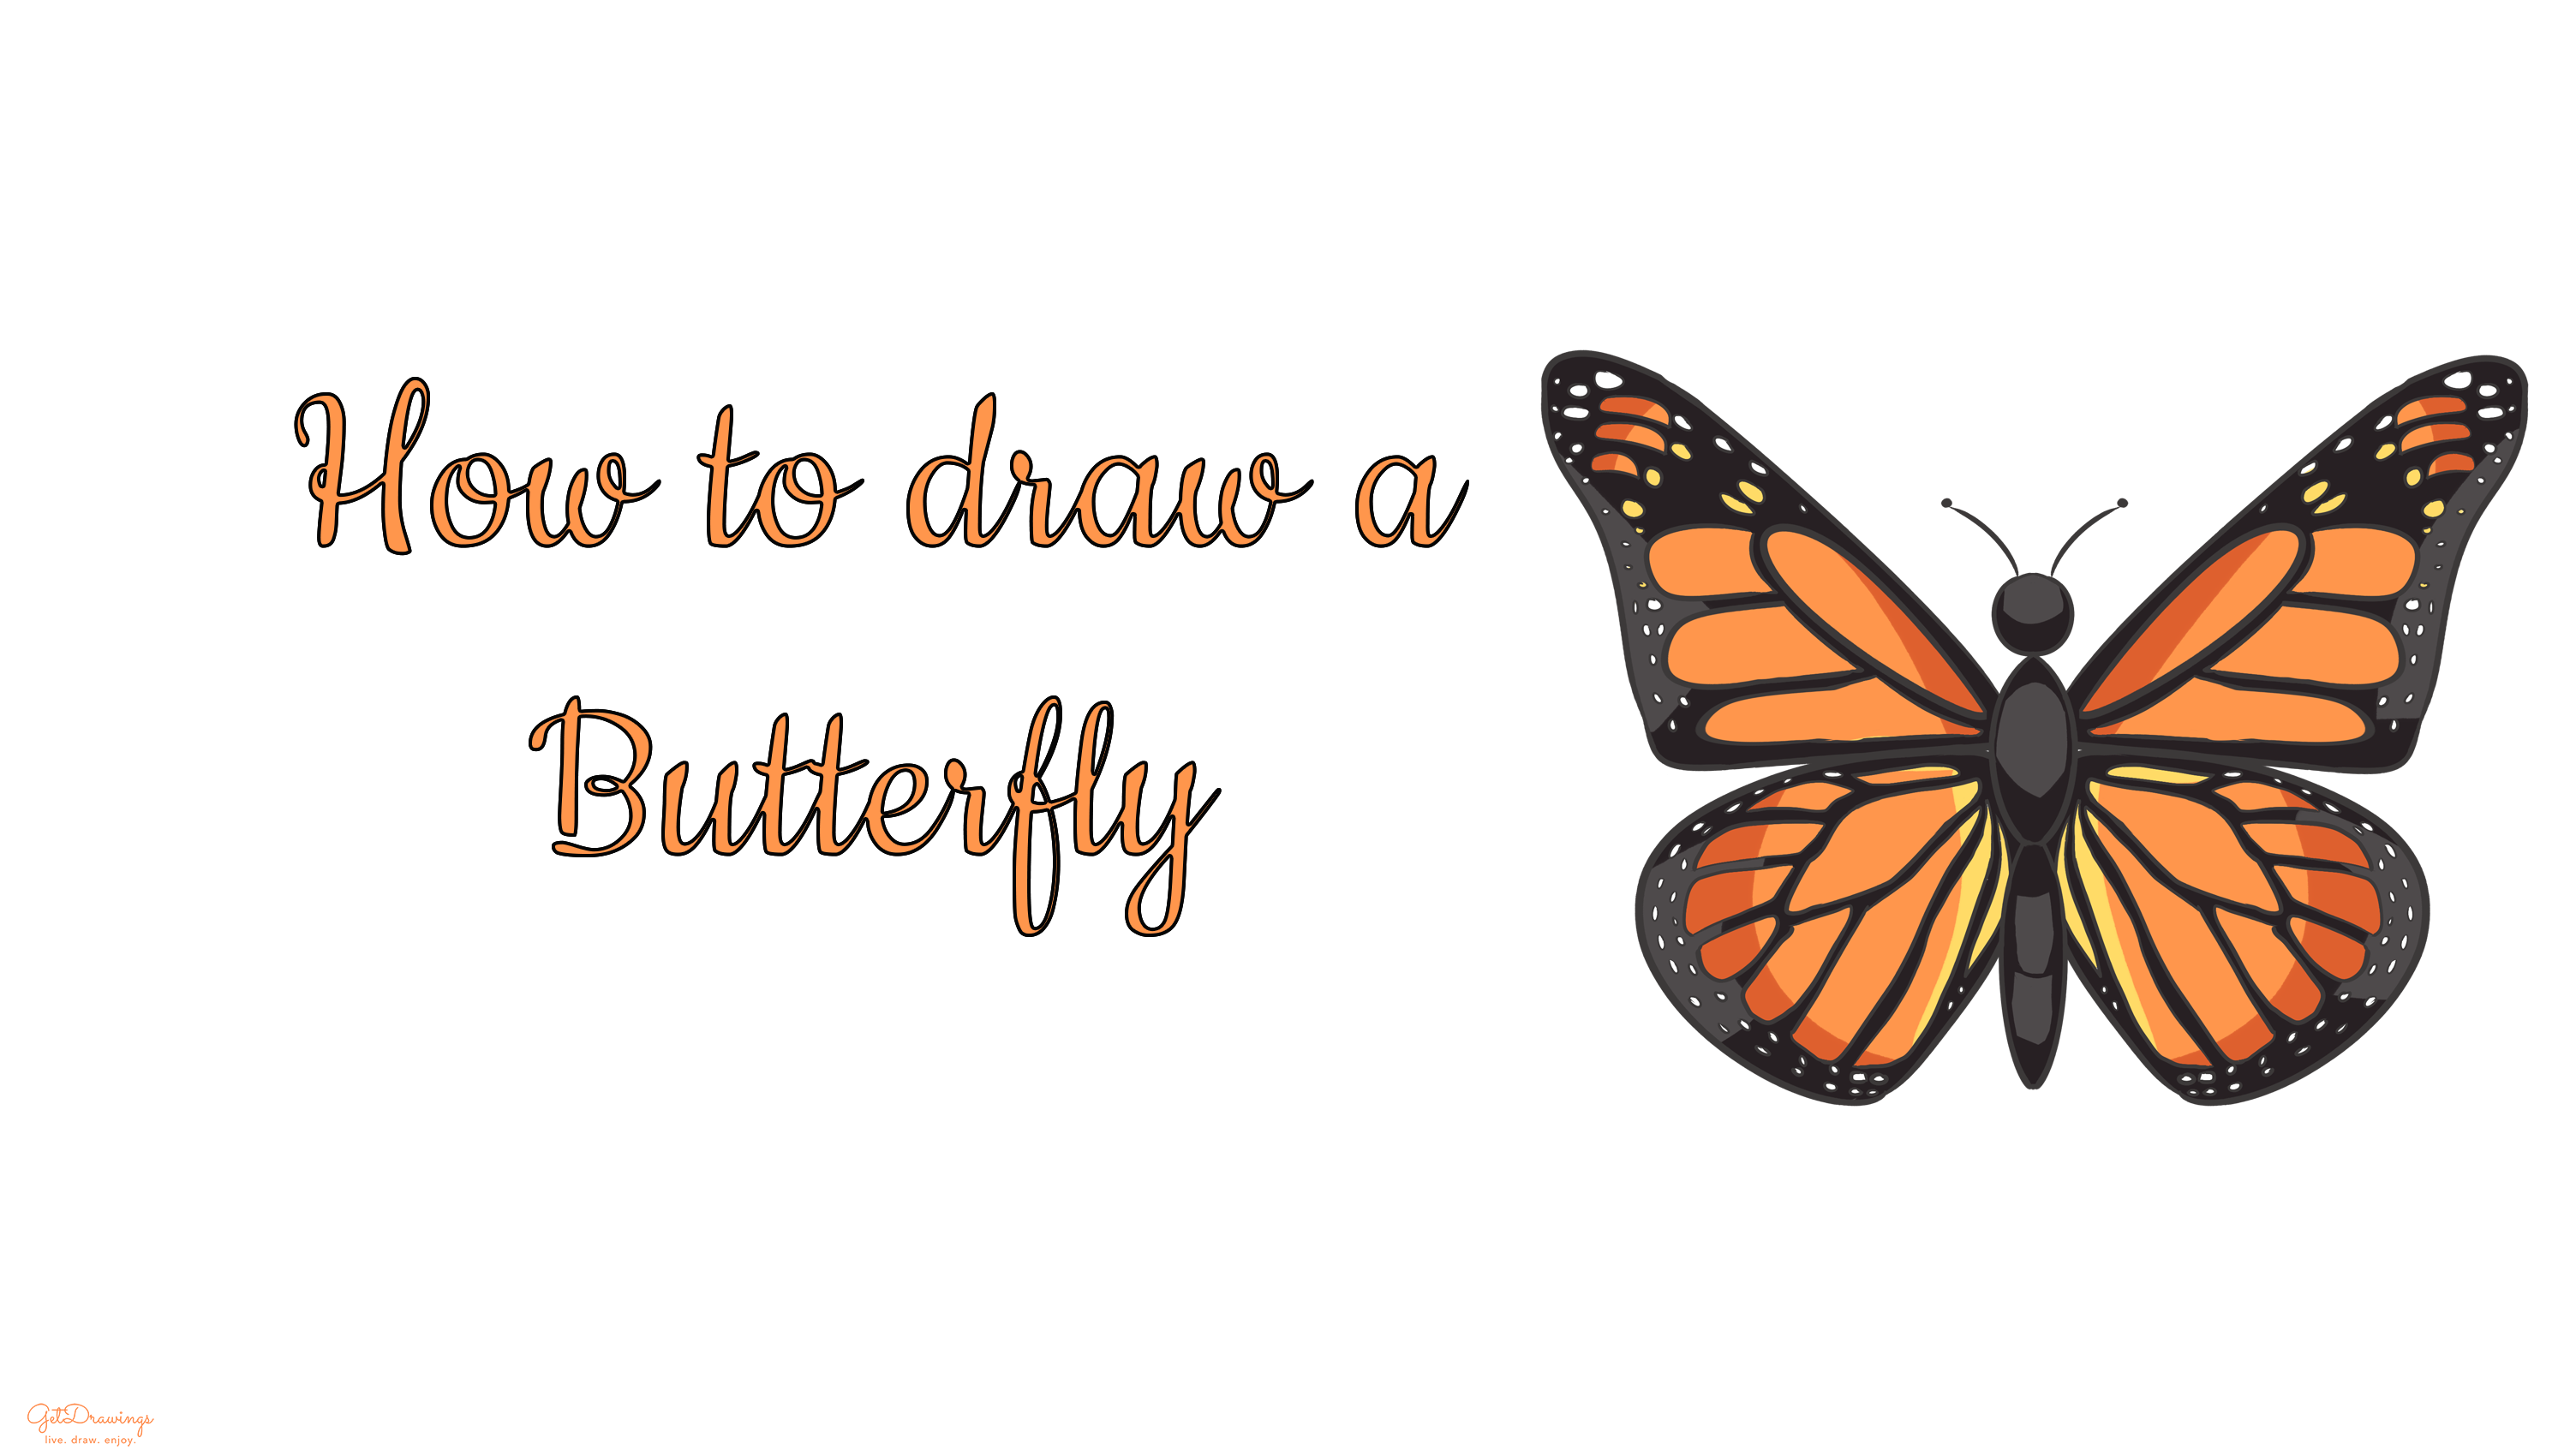 How to draw a Butterfly?